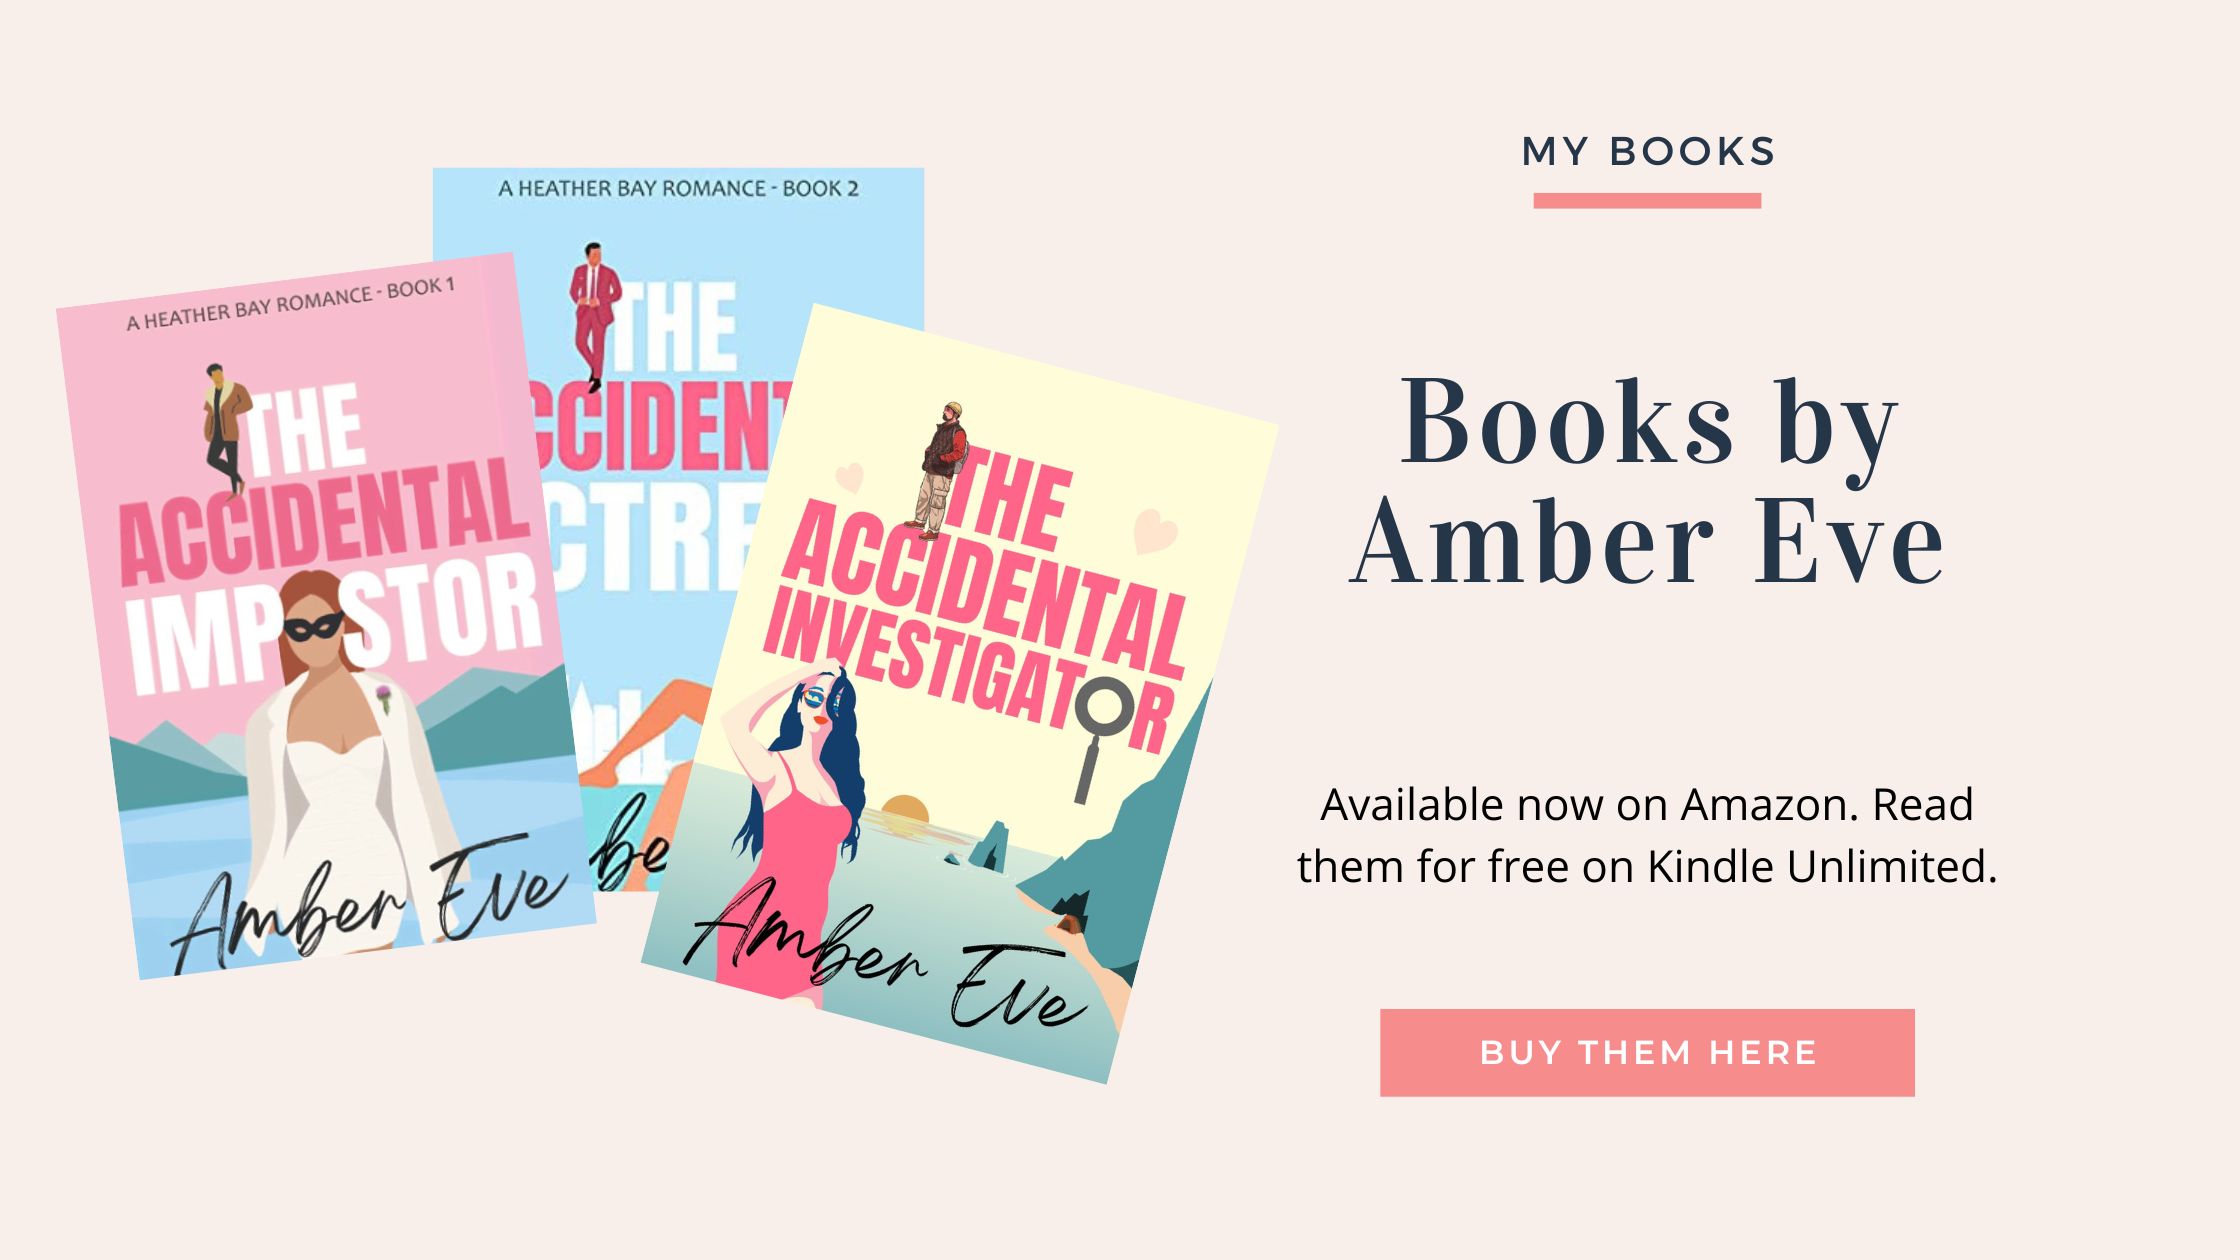 Books by Amber Eve